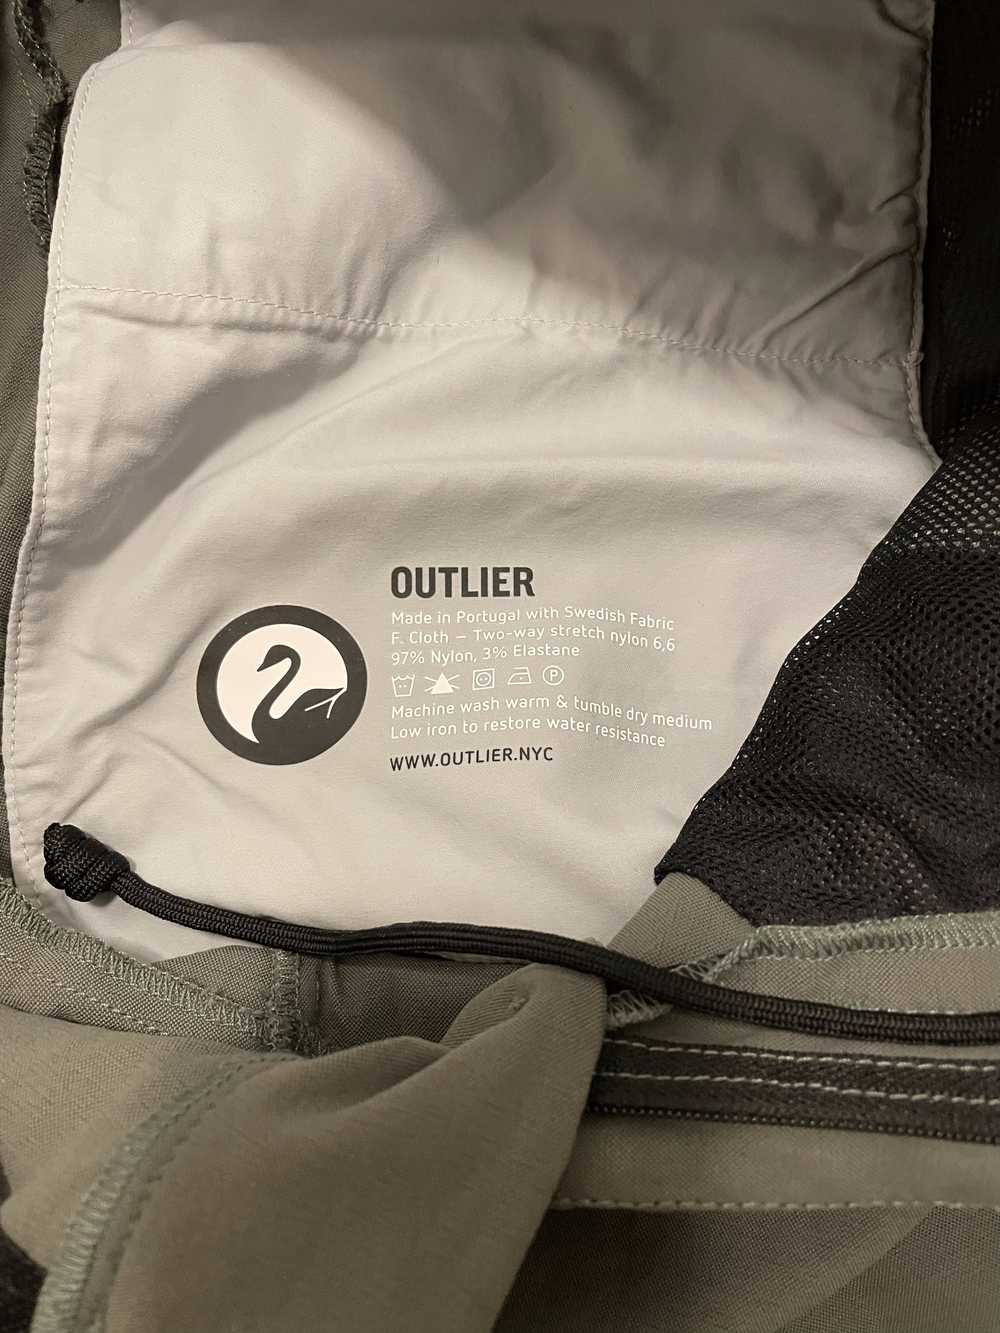 Outlier - New Way Shorts - image 4